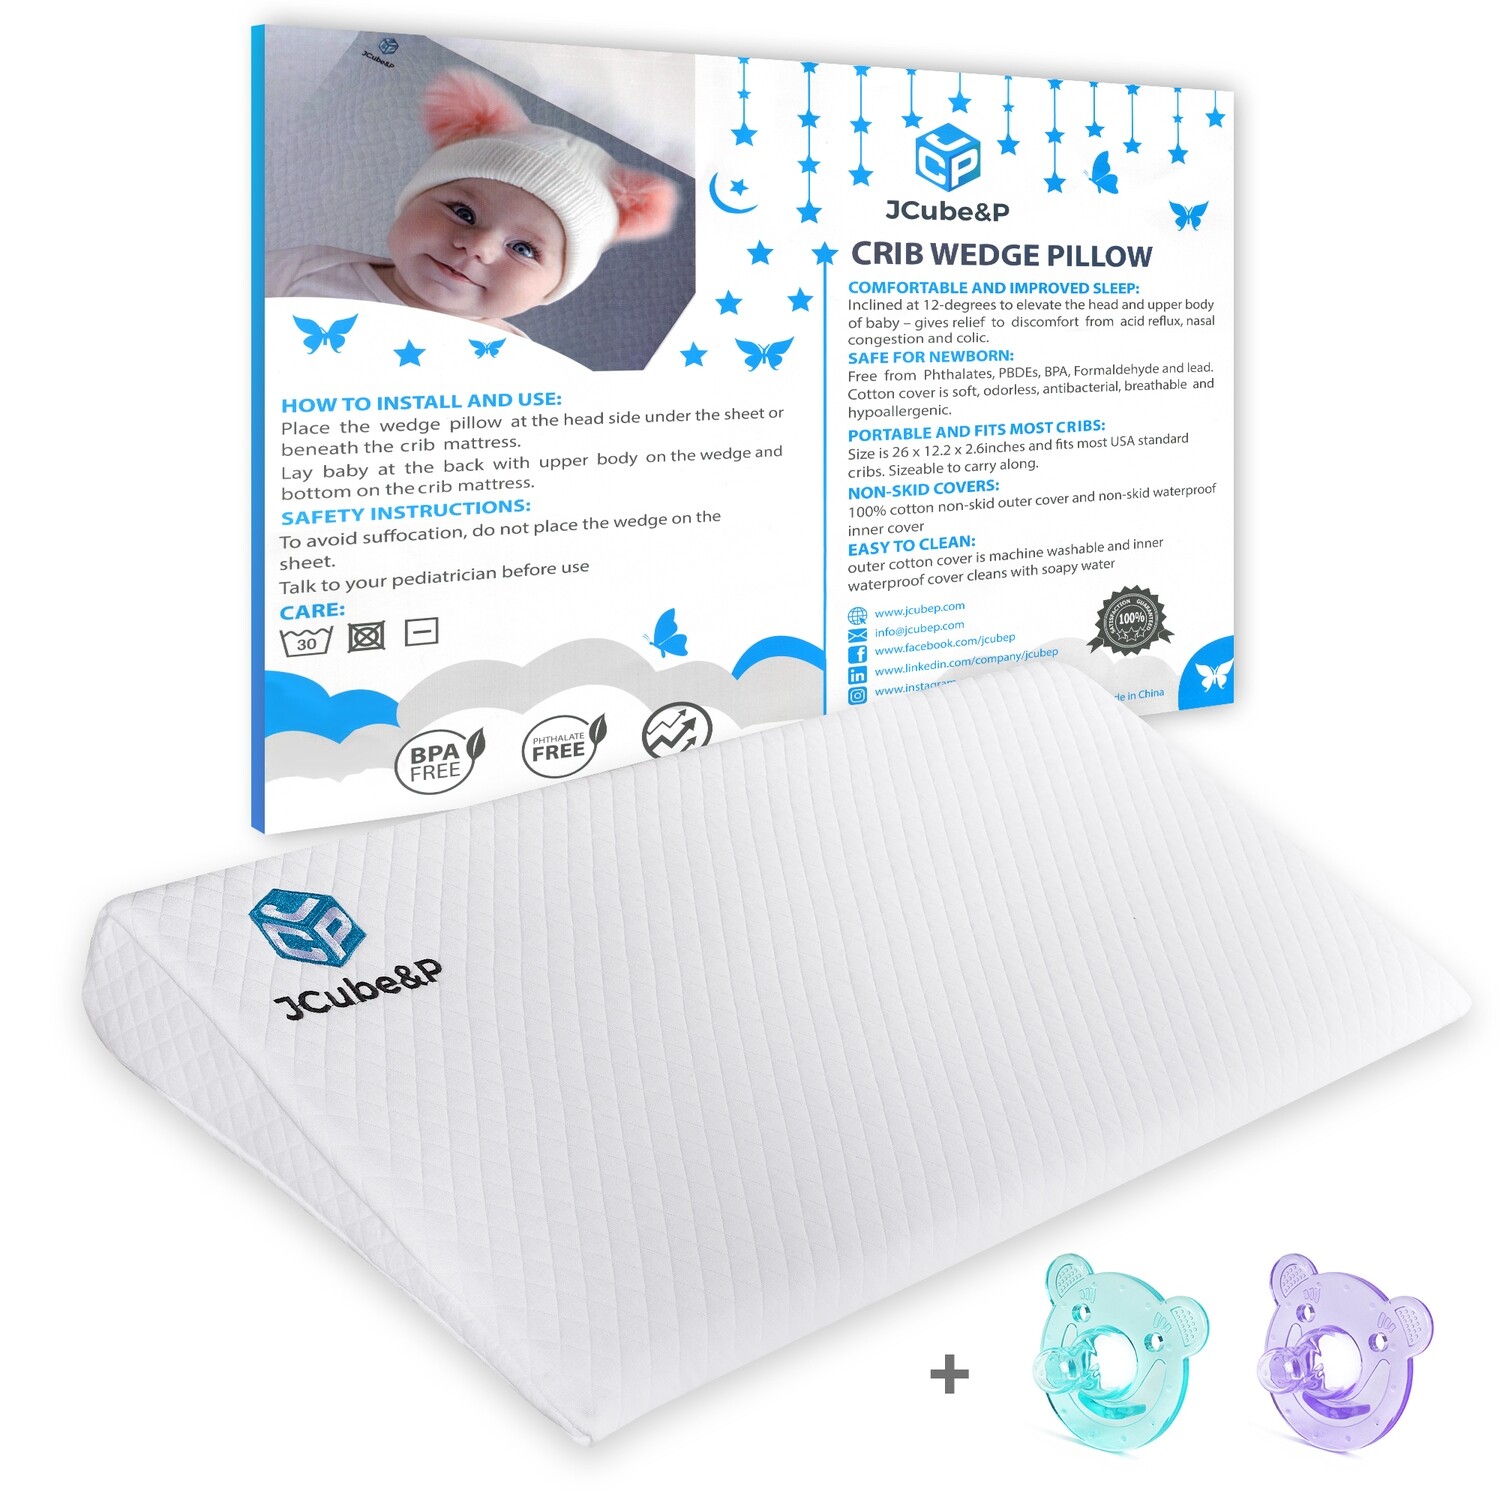 Crib Wedge Pillow with Cotton & Waterproof Covers - 2 Bonus Pacifiers - Newborn Wedge Pillow for Better Sleep - Nasal Congestion, Colic & Acid Reflux Relief Crib Wedge Pad